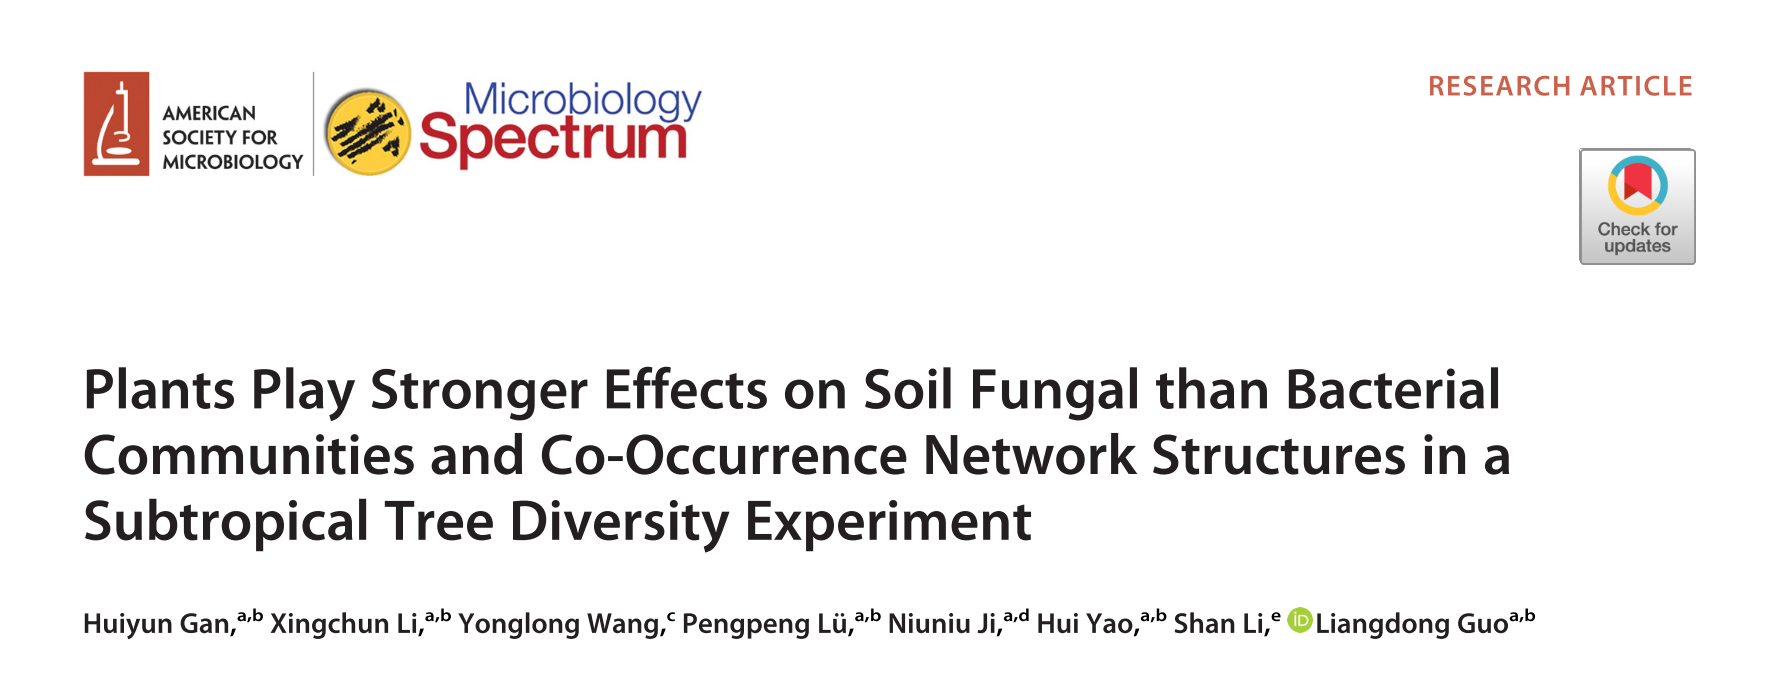 Plants play stronger effects on soil fungal than bacterial communities and co-occurrence network structures in a subtropical tree diversity experiment